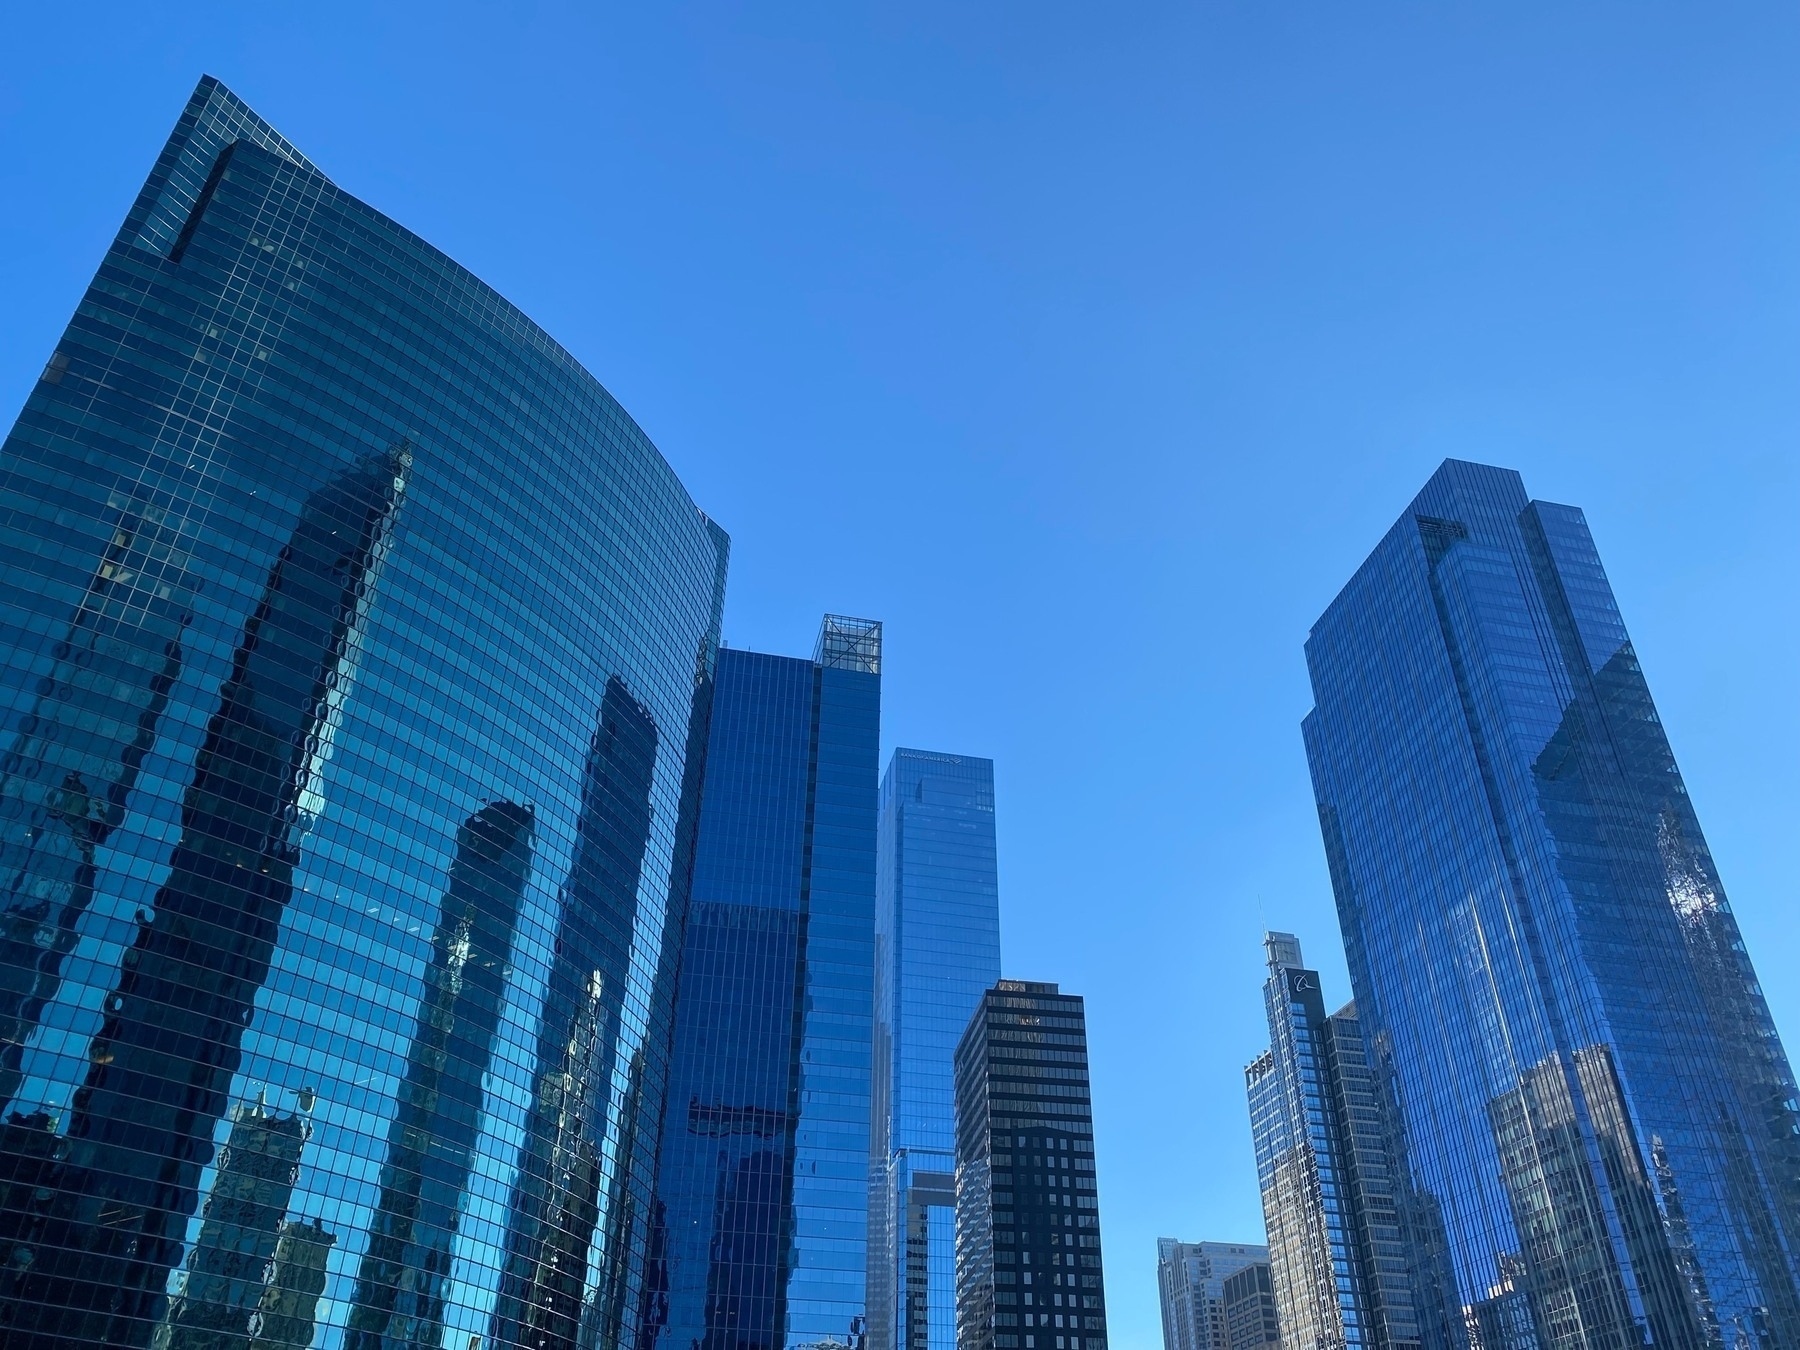 View of glass walled skyscrapers reaching into a blue sky and reflecting images of each other.